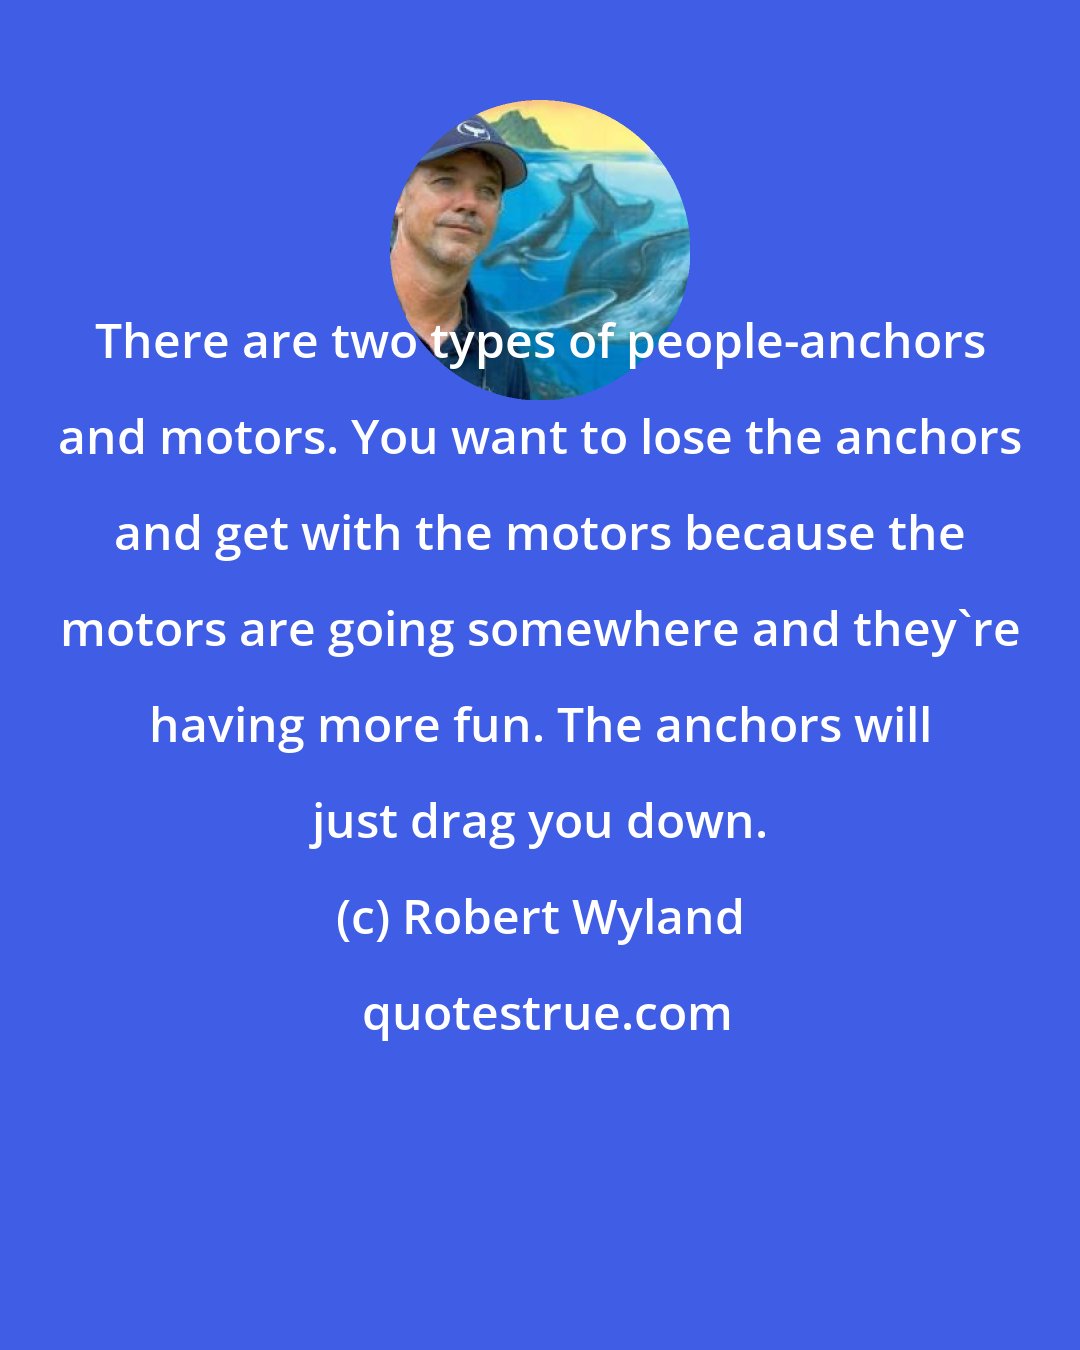 Robert Wyland: There are two types of people-anchors and motors. You want to lose the anchors and get with the motors because the motors are going somewhere and they're having more fun. The anchors will just drag you down.